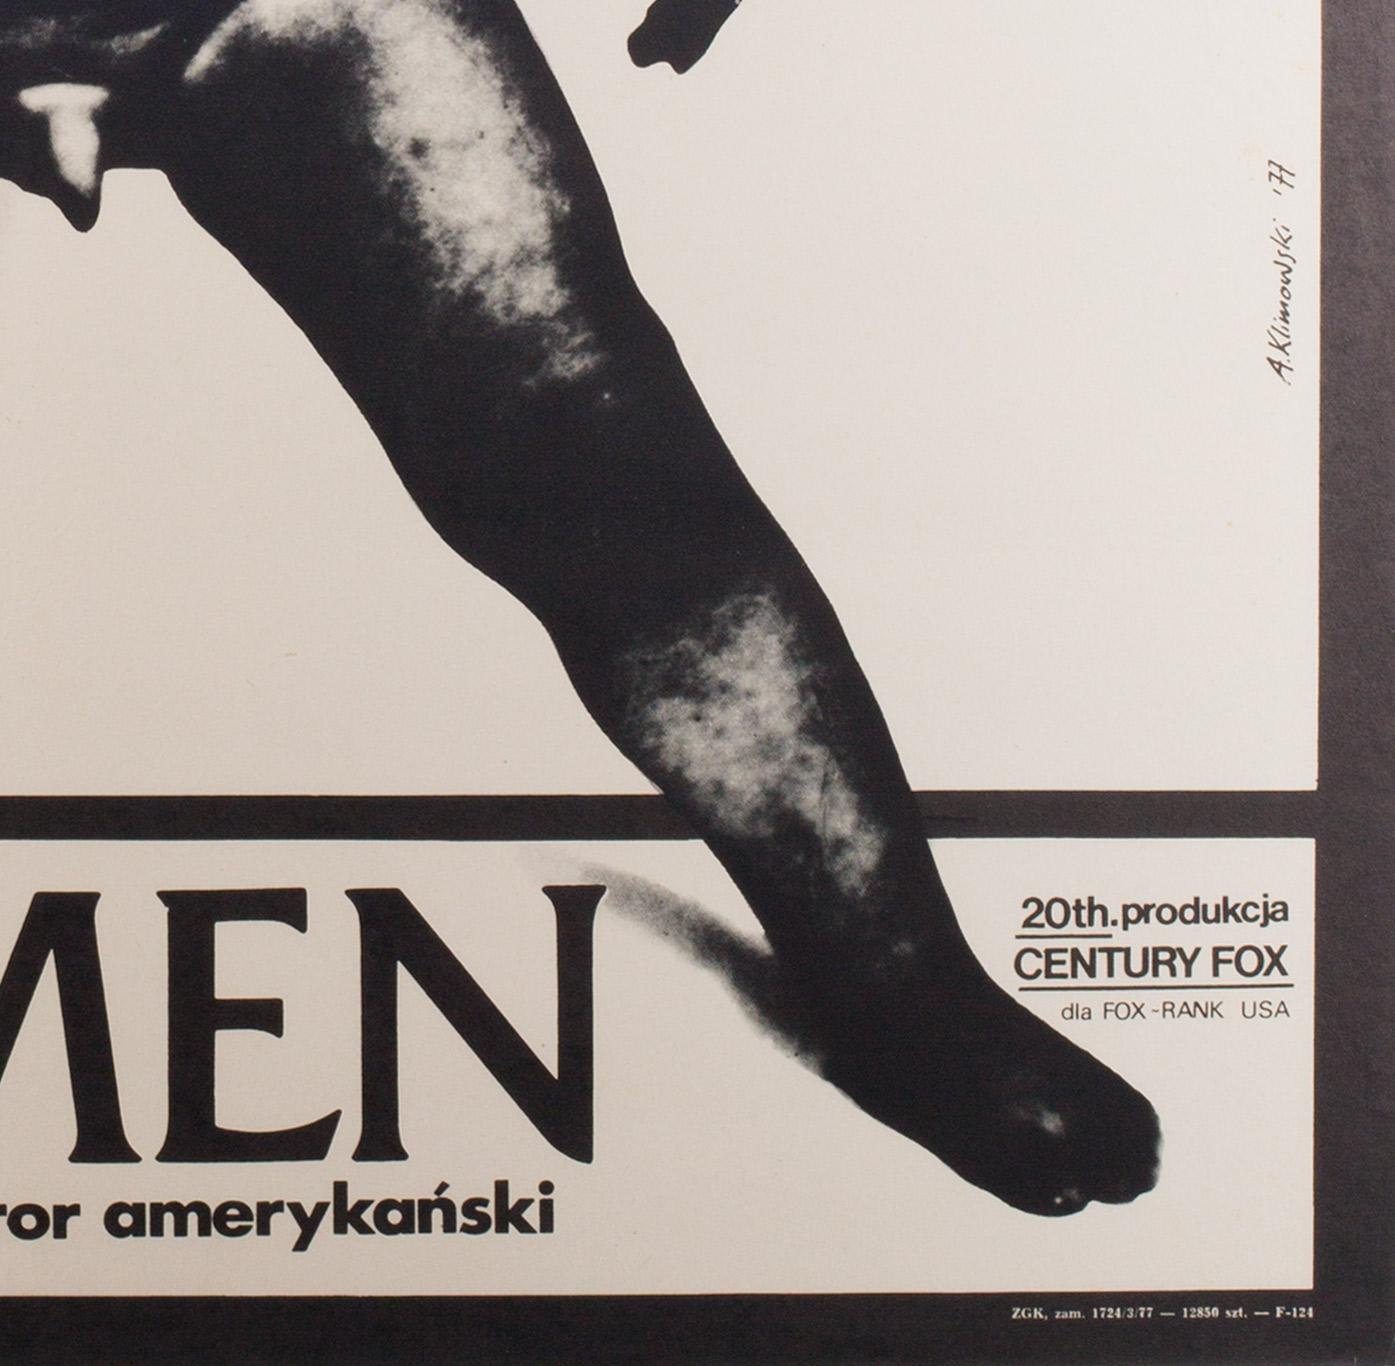 You can always count on vintage Polish film posters to throw up some extraordinarily original artwork. Often challenging, confrontational and, invariably, eye-catching, and the Polish poster for 1970s epochal horror, The Omen, doesn't fail to follow